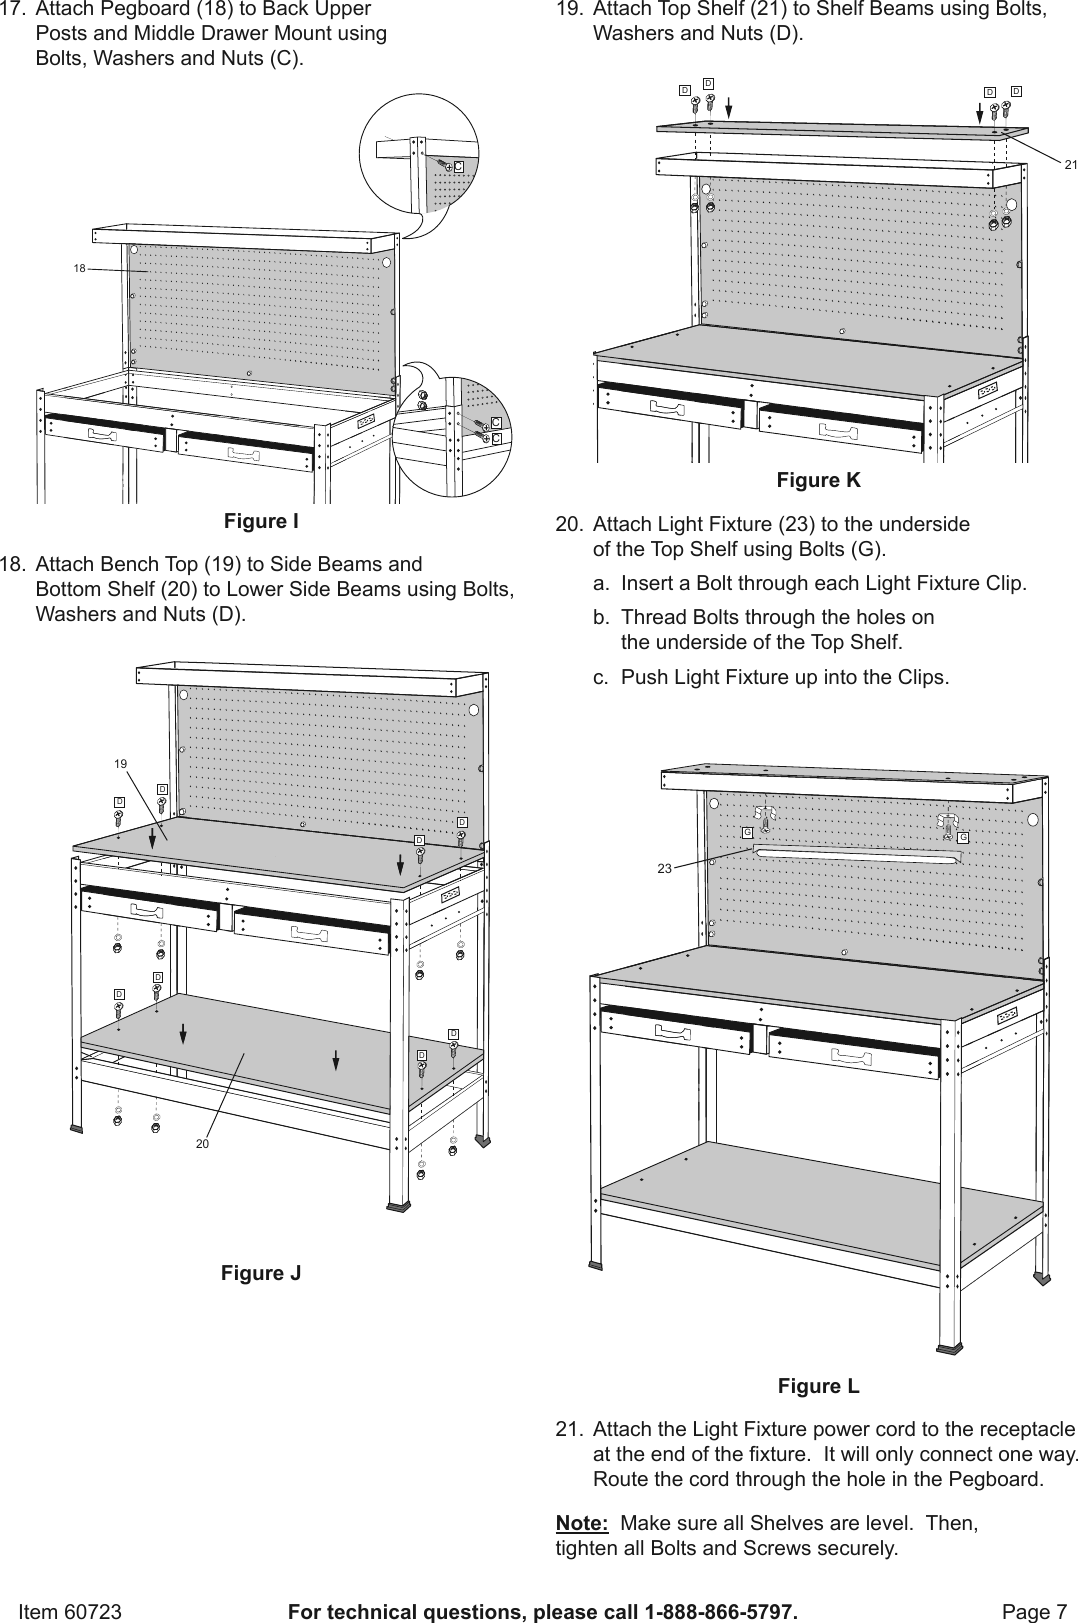 Page 7 of 12 - Harbor-Freight Harbor-Freight-Multipurpose-Workbench-With-Light-Product-Manual-  Harbor-freight-multipurpose-workbench-with-light-product-manual